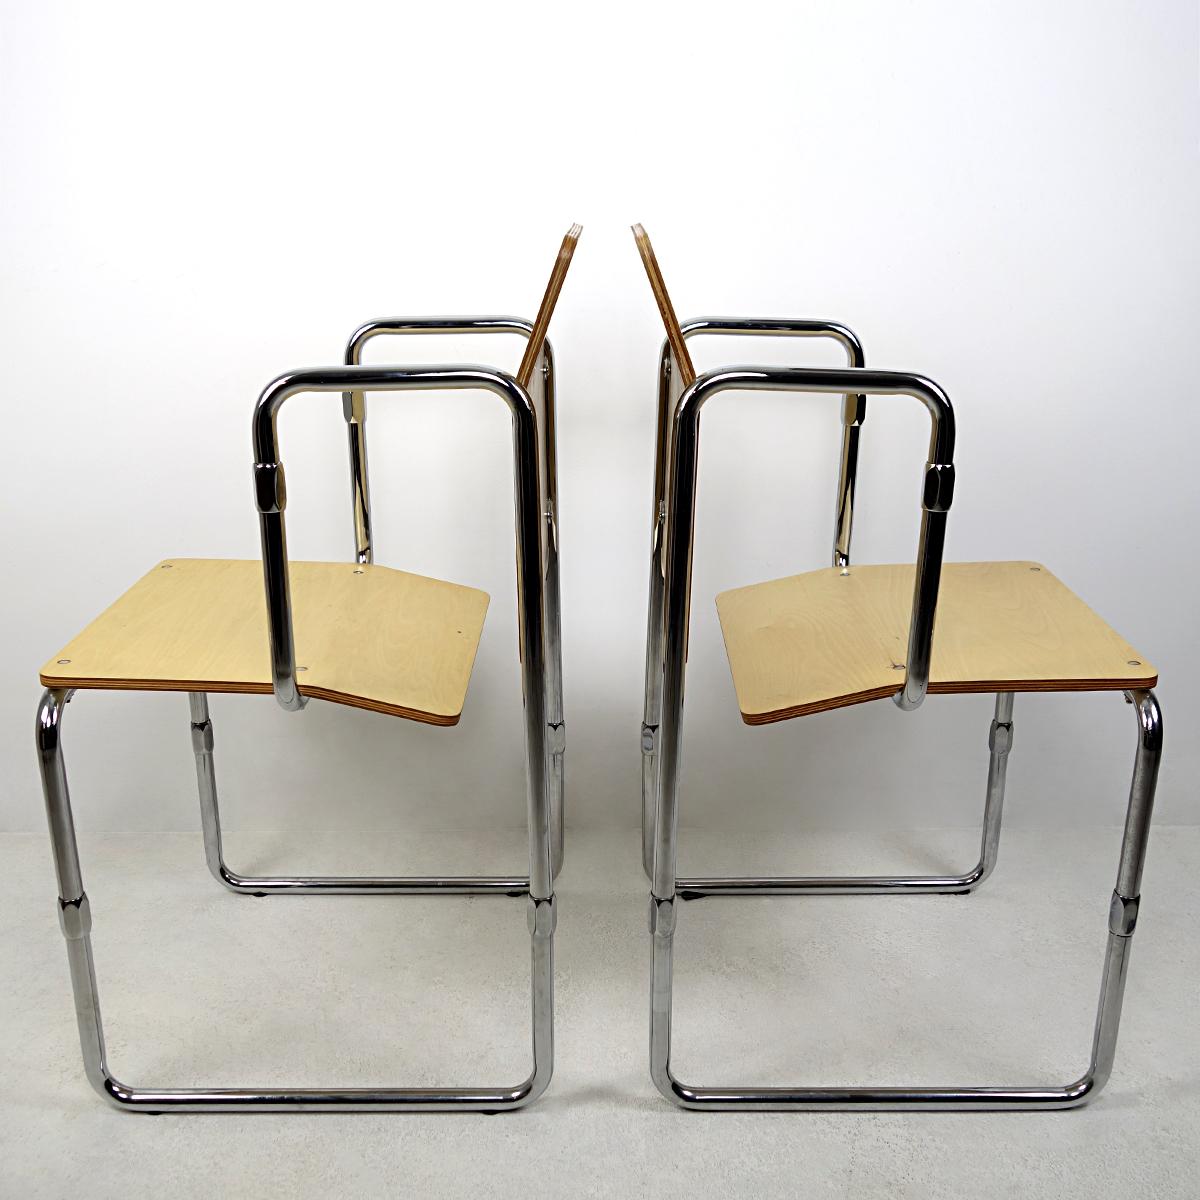 Modernist Hopmi Chair by Gerrit Rietveld Limited Edition Official Reproduction 7